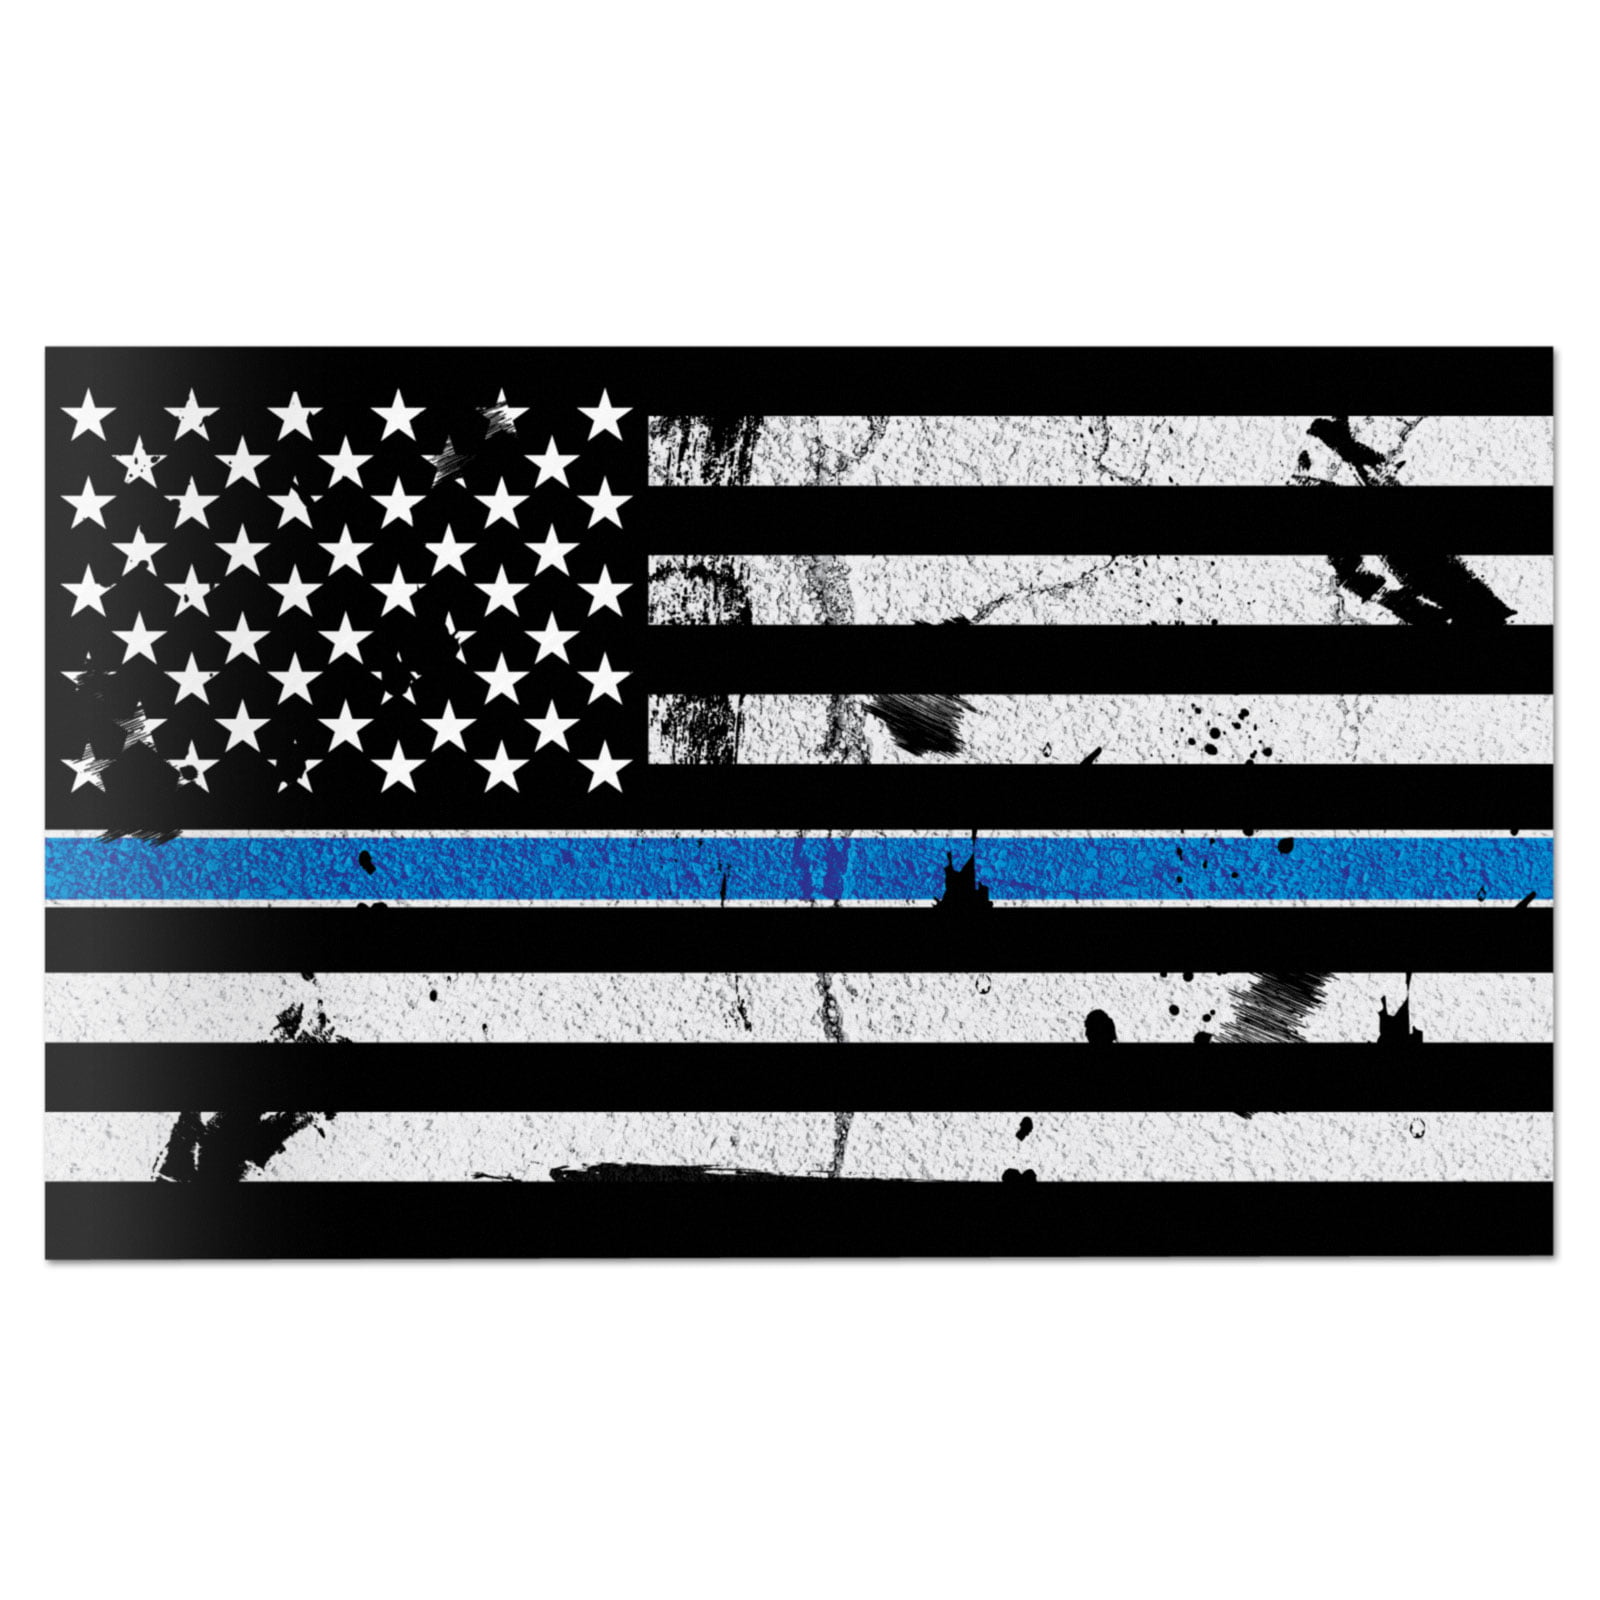 be safe Home Decor Mirror Quote Thin Blue line decal love you Vinyl Mirror or Wall Decal Police Decal law enforcement Decal